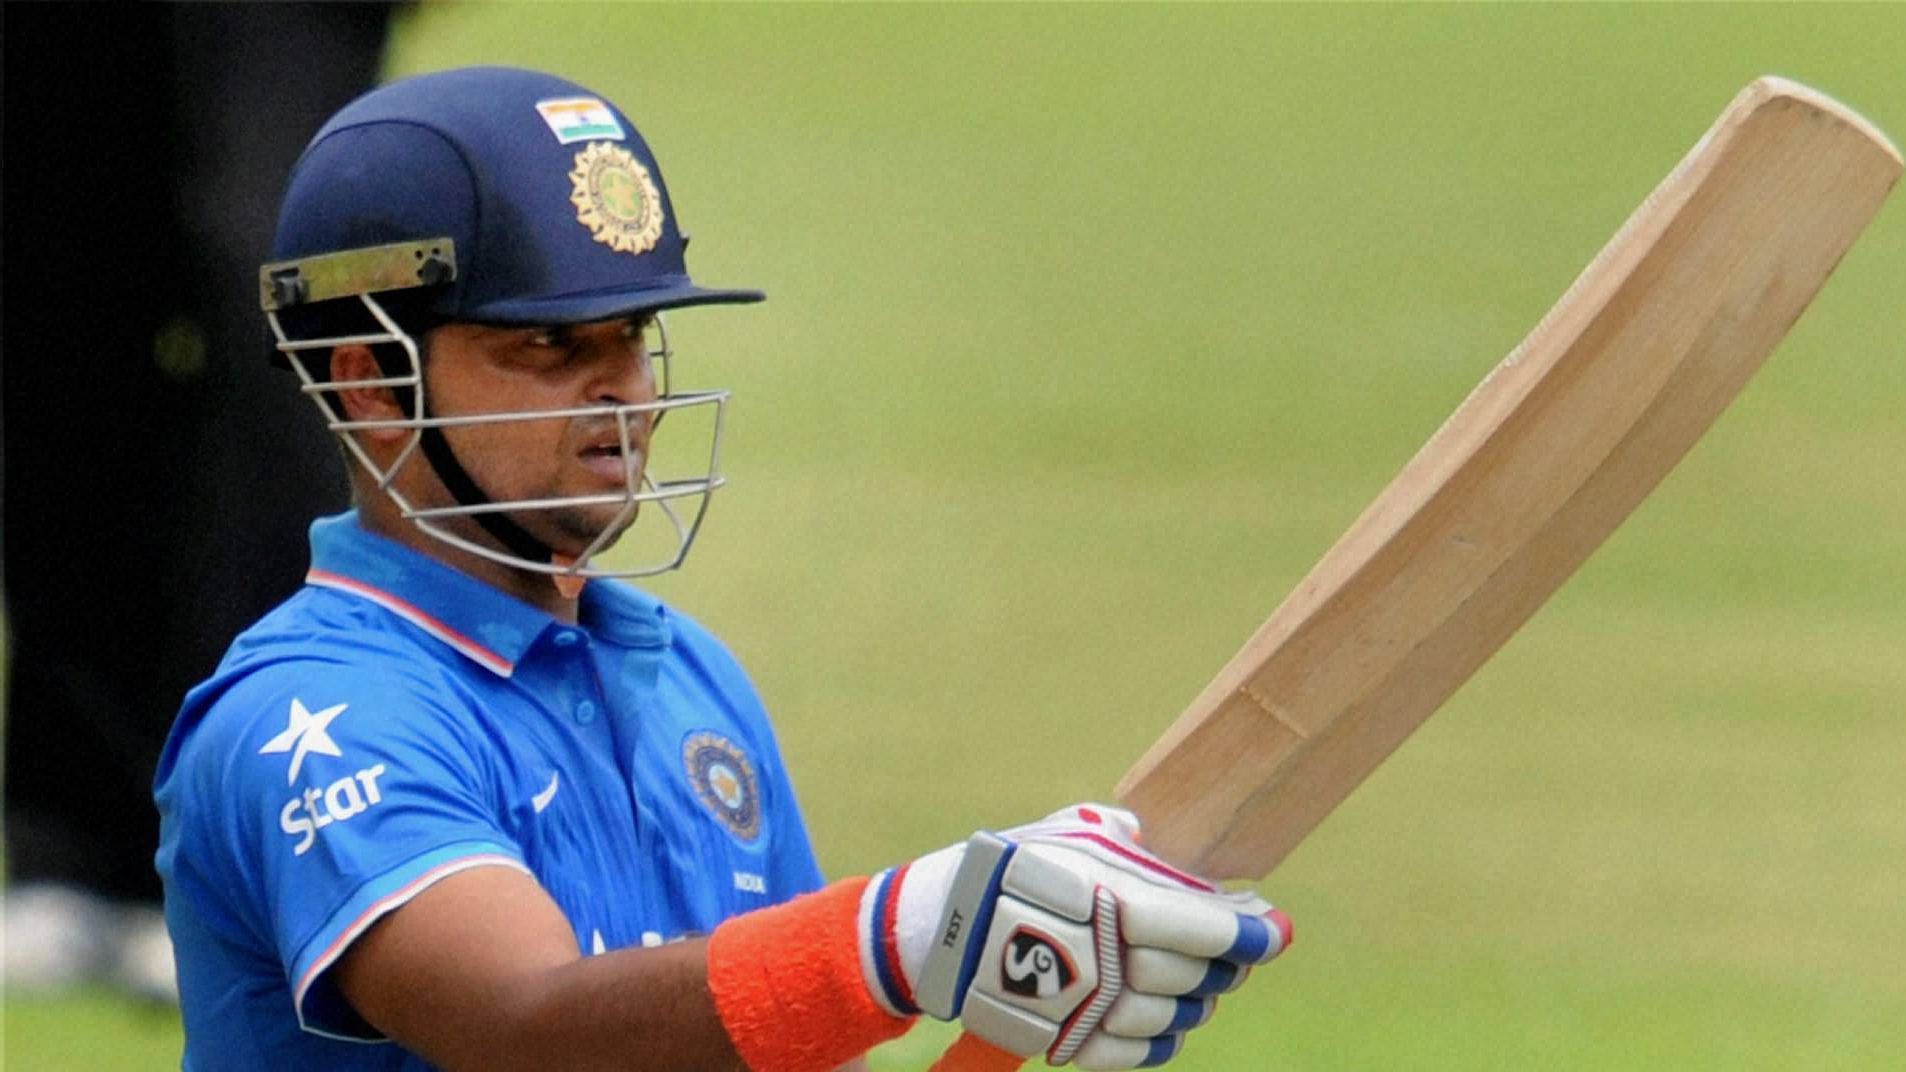 BCCI President Sourav Ganguly has paid a rich tribute to Suresh Raina who also announced his international retirement.